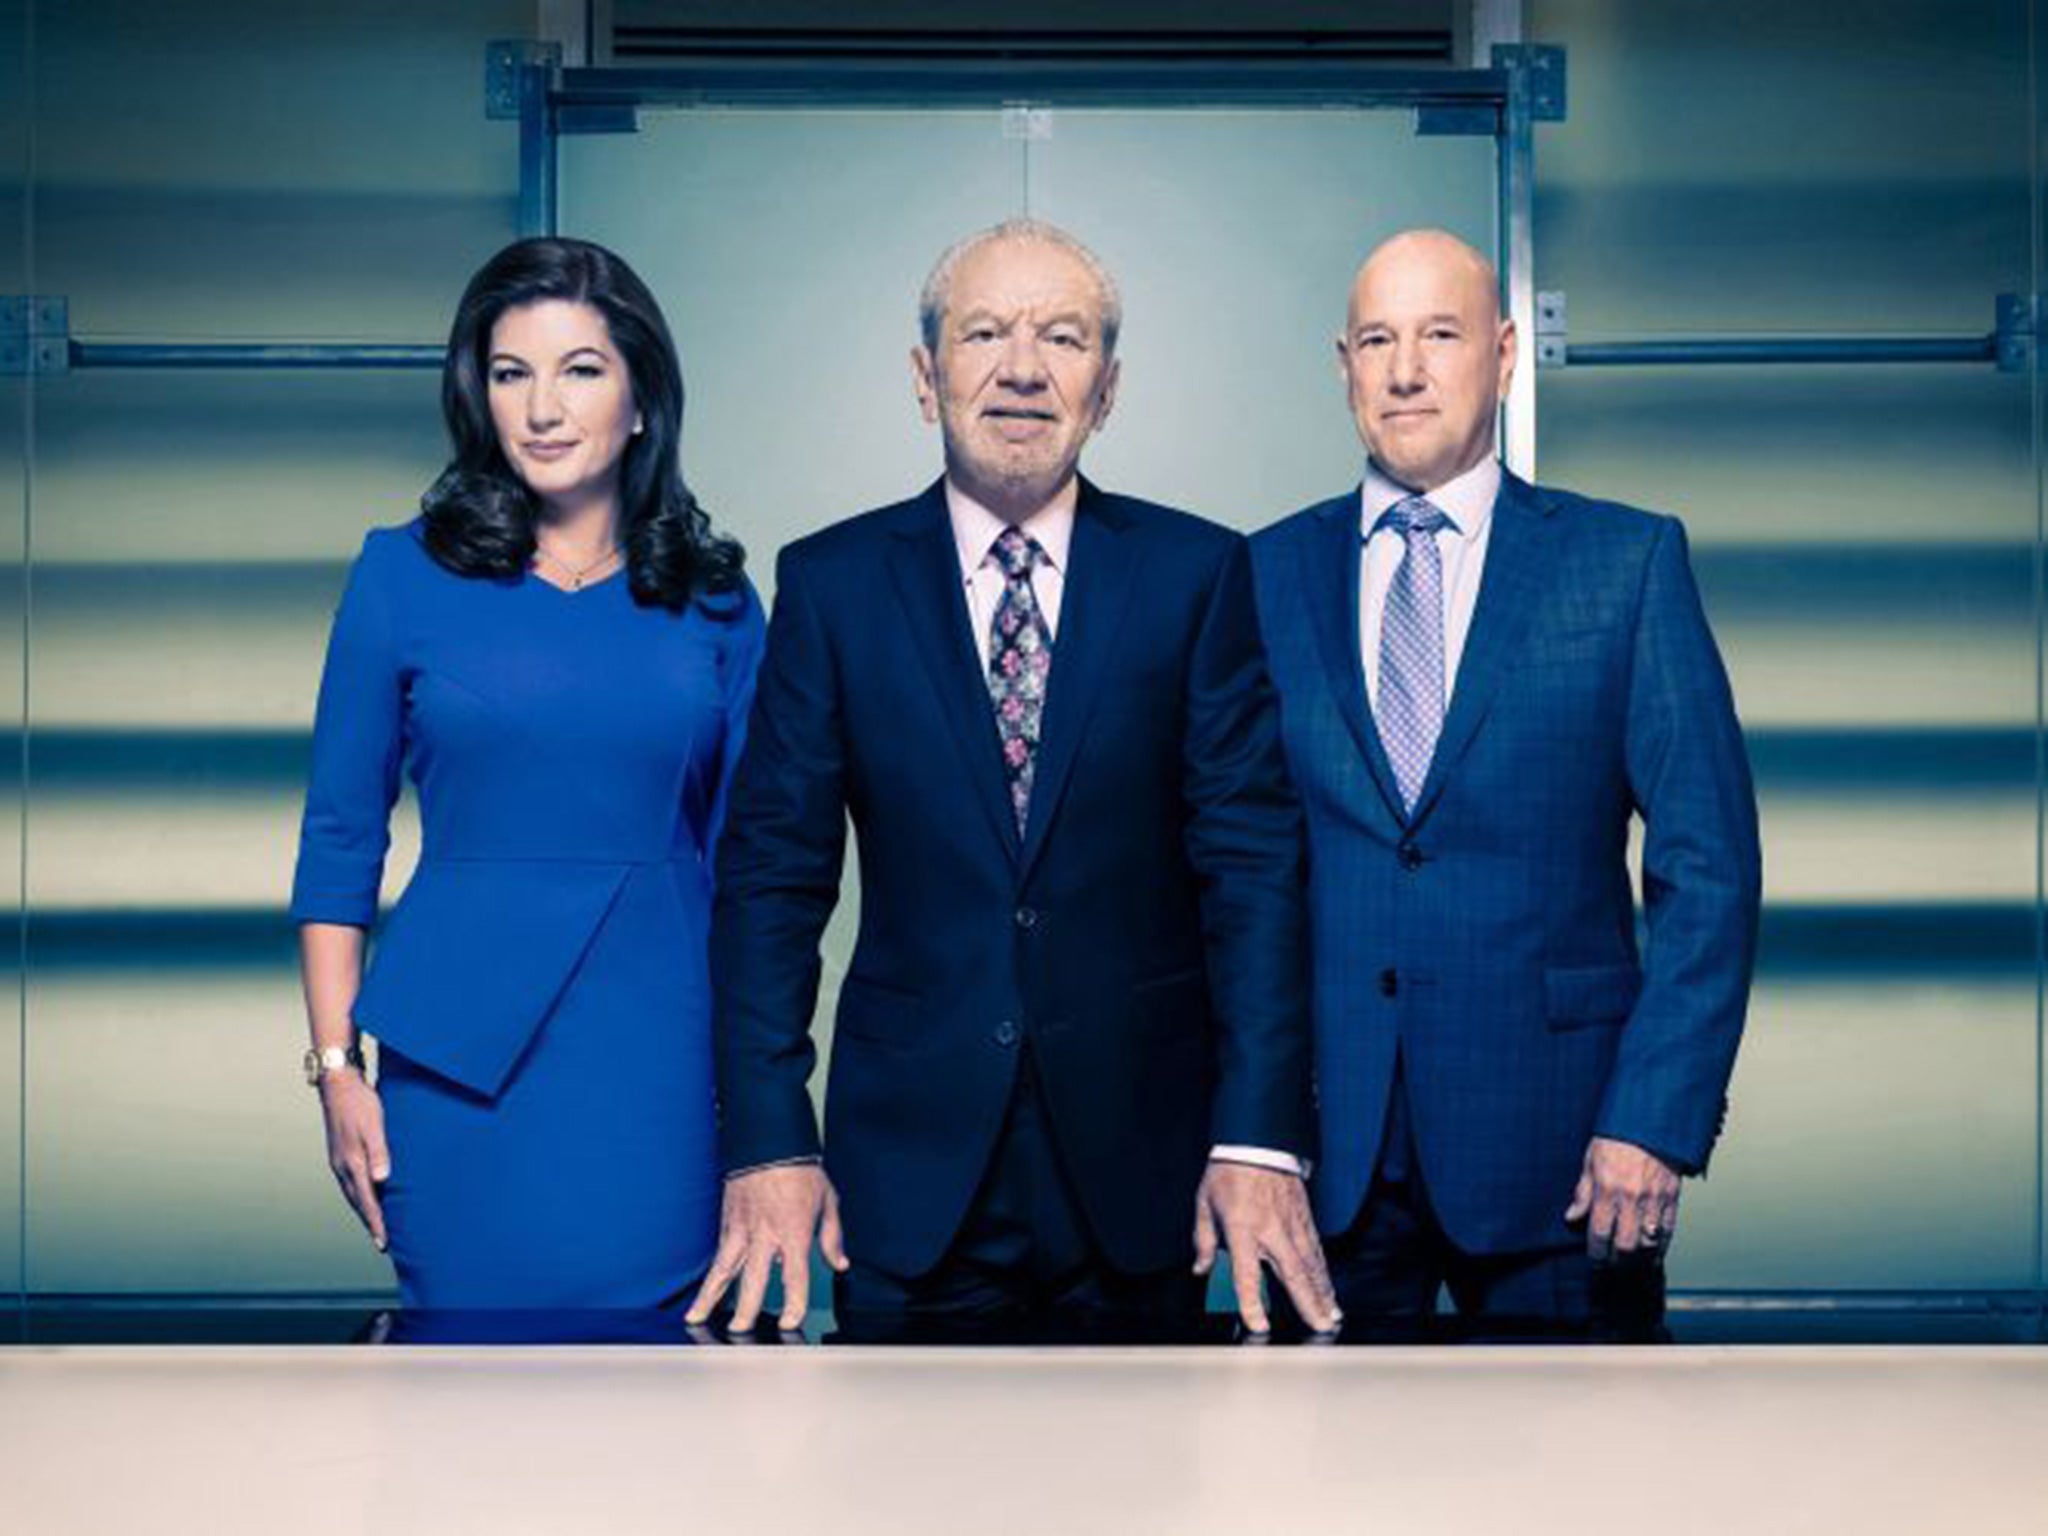 Lord Sugar with The Apprentice judges Karren Brady and Claude Littner